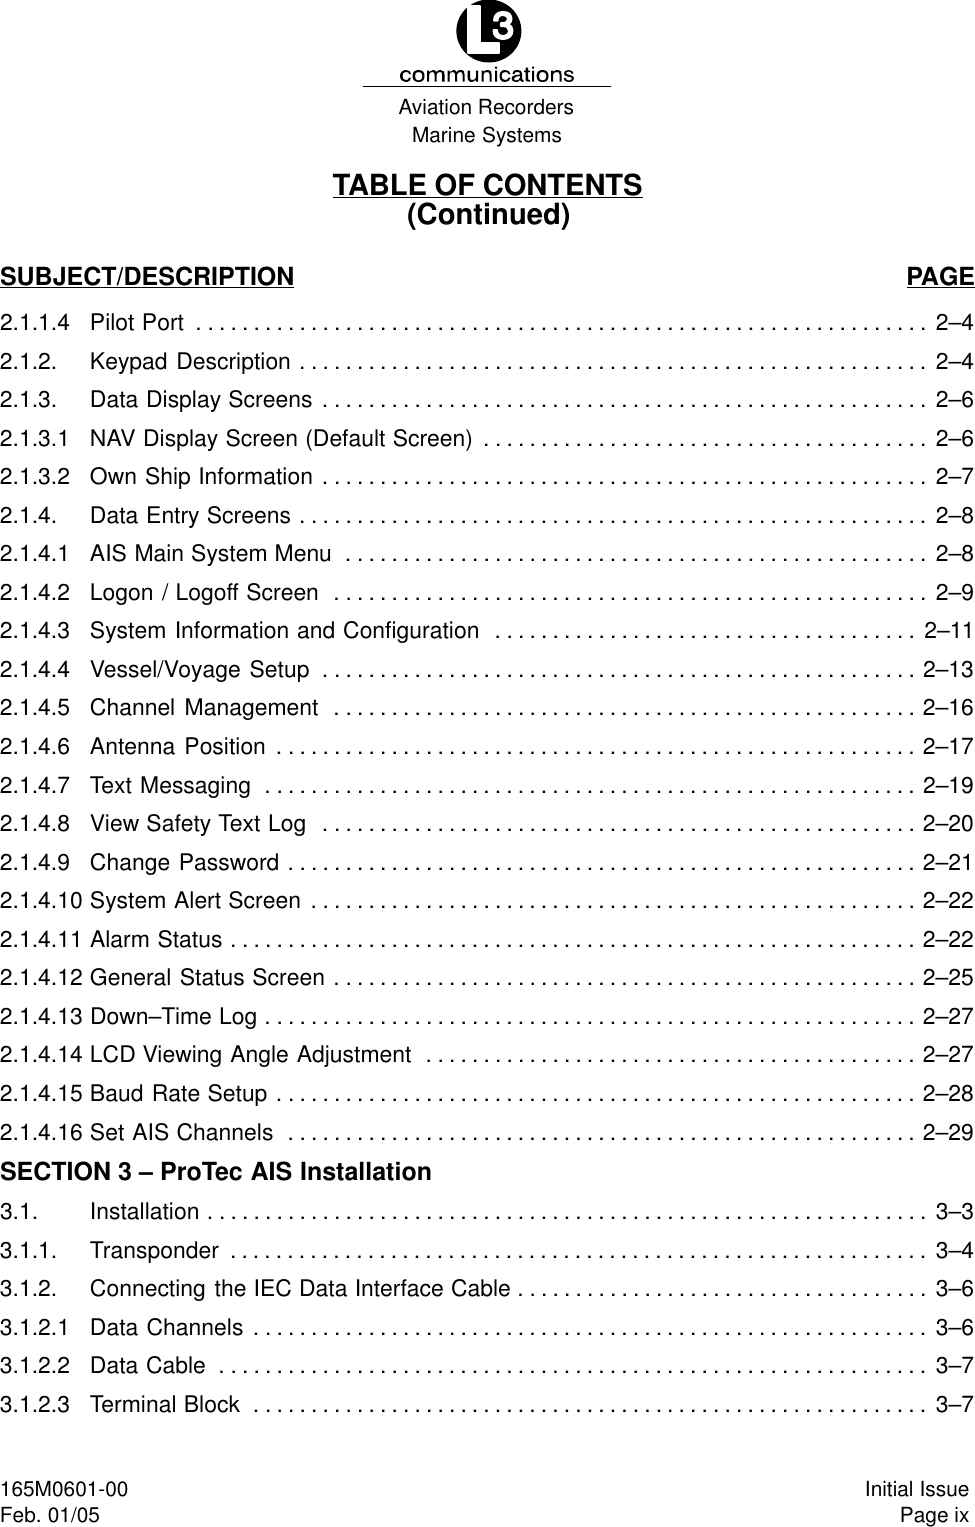 Marine SystemsAviation RecordersPage ixInitial Issue165M0601-00Feb. 01/05TABLE OF CONTENTS(Continued)SUBJECT/DESCRIPTION PAGE2.1.1.4 Pilot Port 2–4. . . . . . . . . . . . . . . . . . . . . . . . . . . . . . . . . . . . . . . . . . . . . . . . . . . . . . . . . . . . . . . . 2.1.2. Keypad Description 2–4. . . . . . . . . . . . . . . . . . . . . . . . . . . . . . . . . . . . . . . . . . . . . . . . . . . . . . . 2.1.3. Data Display Screens 2–6. . . . . . . . . . . . . . . . . . . . . . . . . . . . . . . . . . . . . . . . . . . . . . . . . . . . . 2.1.3.1 NAV Display Screen (Default Screen) 2–6. . . . . . . . . . . . . . . . . . . . . . . . . . . . . . . . . . . . . . . 2.1.3.2 Own Ship Information 2–7. . . . . . . . . . . . . . . . . . . . . . . . . . . . . . . . . . . . . . . . . . . . . . . . . . . . . 2.1.4. Data Entry Screens 2–8. . . . . . . . . . . . . . . . . . . . . . . . . . . . . . . . . . . . . . . . . . . . . . . . . . . . . . . 2.1.4.1 AIS Main System Menu 2–8. . . . . . . . . . . . . . . . . . . . . . . . . . . . . . . . . . . . . . . . . . . . . . . . . . . 2.1.4.2 Logon / Logoff Screen 2–9. . . . . . . . . . . . . . . . . . . . . . . . . . . . . . . . . . . . . . . . . . . . . . . . . . . . 2.1.4.3 System Information and Configuration 2–11. . . . . . . . . . . . . . . . . . . . . . . . . . . . . . . . . . . . . 2.1.4.4 Vessel/Voyage Setup 2–13. . . . . . . . . . . . . . . . . . . . . . . . . . . . . . . . . . . . . . . . . . . . . . . . . . . . 2.1.4.5 Channel Management 2–16. . . . . . . . . . . . . . . . . . . . . . . . . . . . . . . . . . . . . . . . . . . . . . . . . . . 2.1.4.6 Antenna Position 2–17. . . . . . . . . . . . . . . . . . . . . . . . . . . . . . . . . . . . . . . . . . . . . . . . . . . . . . . . 2.1.4.7 Text Messaging 2–19. . . . . . . . . . . . . . . . . . . . . . . . . . . . . . . . . . . . . . . . . . . . . . . . . . . . . . . . . 2.1.4.8 View Safety Text Log 2–20. . . . . . . . . . . . . . . . . . . . . . . . . . . . . . . . . . . . . . . . . . . . . . . . . . . . 2.1.4.9 Change Password 2–21. . . . . . . . . . . . . . . . . . . . . . . . . . . . . . . . . . . . . . . . . . . . . . . . . . . . . . . 2.1.4.10 System Alert Screen 2–22. . . . . . . . . . . . . . . . . . . . . . . . . . . . . . . . . . . . . . . . . . . . . . . . . . . . . 2.1.4.11 Alarm Status 2–22. . . . . . . . . . . . . . . . . . . . . . . . . . . . . . . . . . . . . . . . . . . . . . . . . . . . . . . . . . . . 2.1.4.12 General Status Screen 2–25. . . . . . . . . . . . . . . . . . . . . . . . . . . . . . . . . . . . . . . . . . . . . . . . . . . 2.1.4.13 Down–Time Log 2–27. . . . . . . . . . . . . . . . . . . . . . . . . . . . . . . . . . . . . . . . . . . . . . . . . . . . . . . . . 2.1.4.14 LCD Viewing Angle Adjustment 2–27. . . . . . . . . . . . . . . . . . . . . . . . . . . . . . . . . . . . . . . . . . . 2.1.4.15 Baud Rate Setup 2–28. . . . . . . . . . . . . . . . . . . . . . . . . . . . . . . . . . . . . . . . . . . . . . . . . . . . . . . . 2.1.4.16 Set AIS Channels 2–29. . . . . . . . . . . . . . . . . . . . . . . . . . . . . . . . . . . . . . . . . . . . . . . . . . . . . . . SECTION 3 – ProTec AIS Installation3.1. Installation 3–3. . . . . . . . . . . . . . . . . . . . . . . . . . . . . . . . . . . . . . . . . . . . . . . . . . . . . . . . . . . . . . . 3.1.1. Transponder 3–4. . . . . . . . . . . . . . . . . . . . . . . . . . . . . . . . . . . . . . . . . . . . . . . . . . . . . . . . . . . . . 3.1.2. Connecting the IEC Data Interface Cable 3–6. . . . . . . . . . . . . . . . . . . . . . . . . . . . . . . . . . . . 3.1.2.1 Data Channels 3–6. . . . . . . . . . . . . . . . . . . . . . . . . . . . . . . . . . . . . . . . . . . . . . . . . . . . . . . . . . . 3.1.2.2 Data Cable 3–7. . . . . . . . . . . . . . . . . . . . . . . . . . . . . . . . . . . . . . . . . . . . . . . . . . . . . . . . . . . . . . 3.1.2.3 Terminal Block 3–7. . . . . . . . . . . . . . . . . . . . . . . . . . . . . . . . . . . . . . . . . . . . . . . . . . . . . . . . . . . 